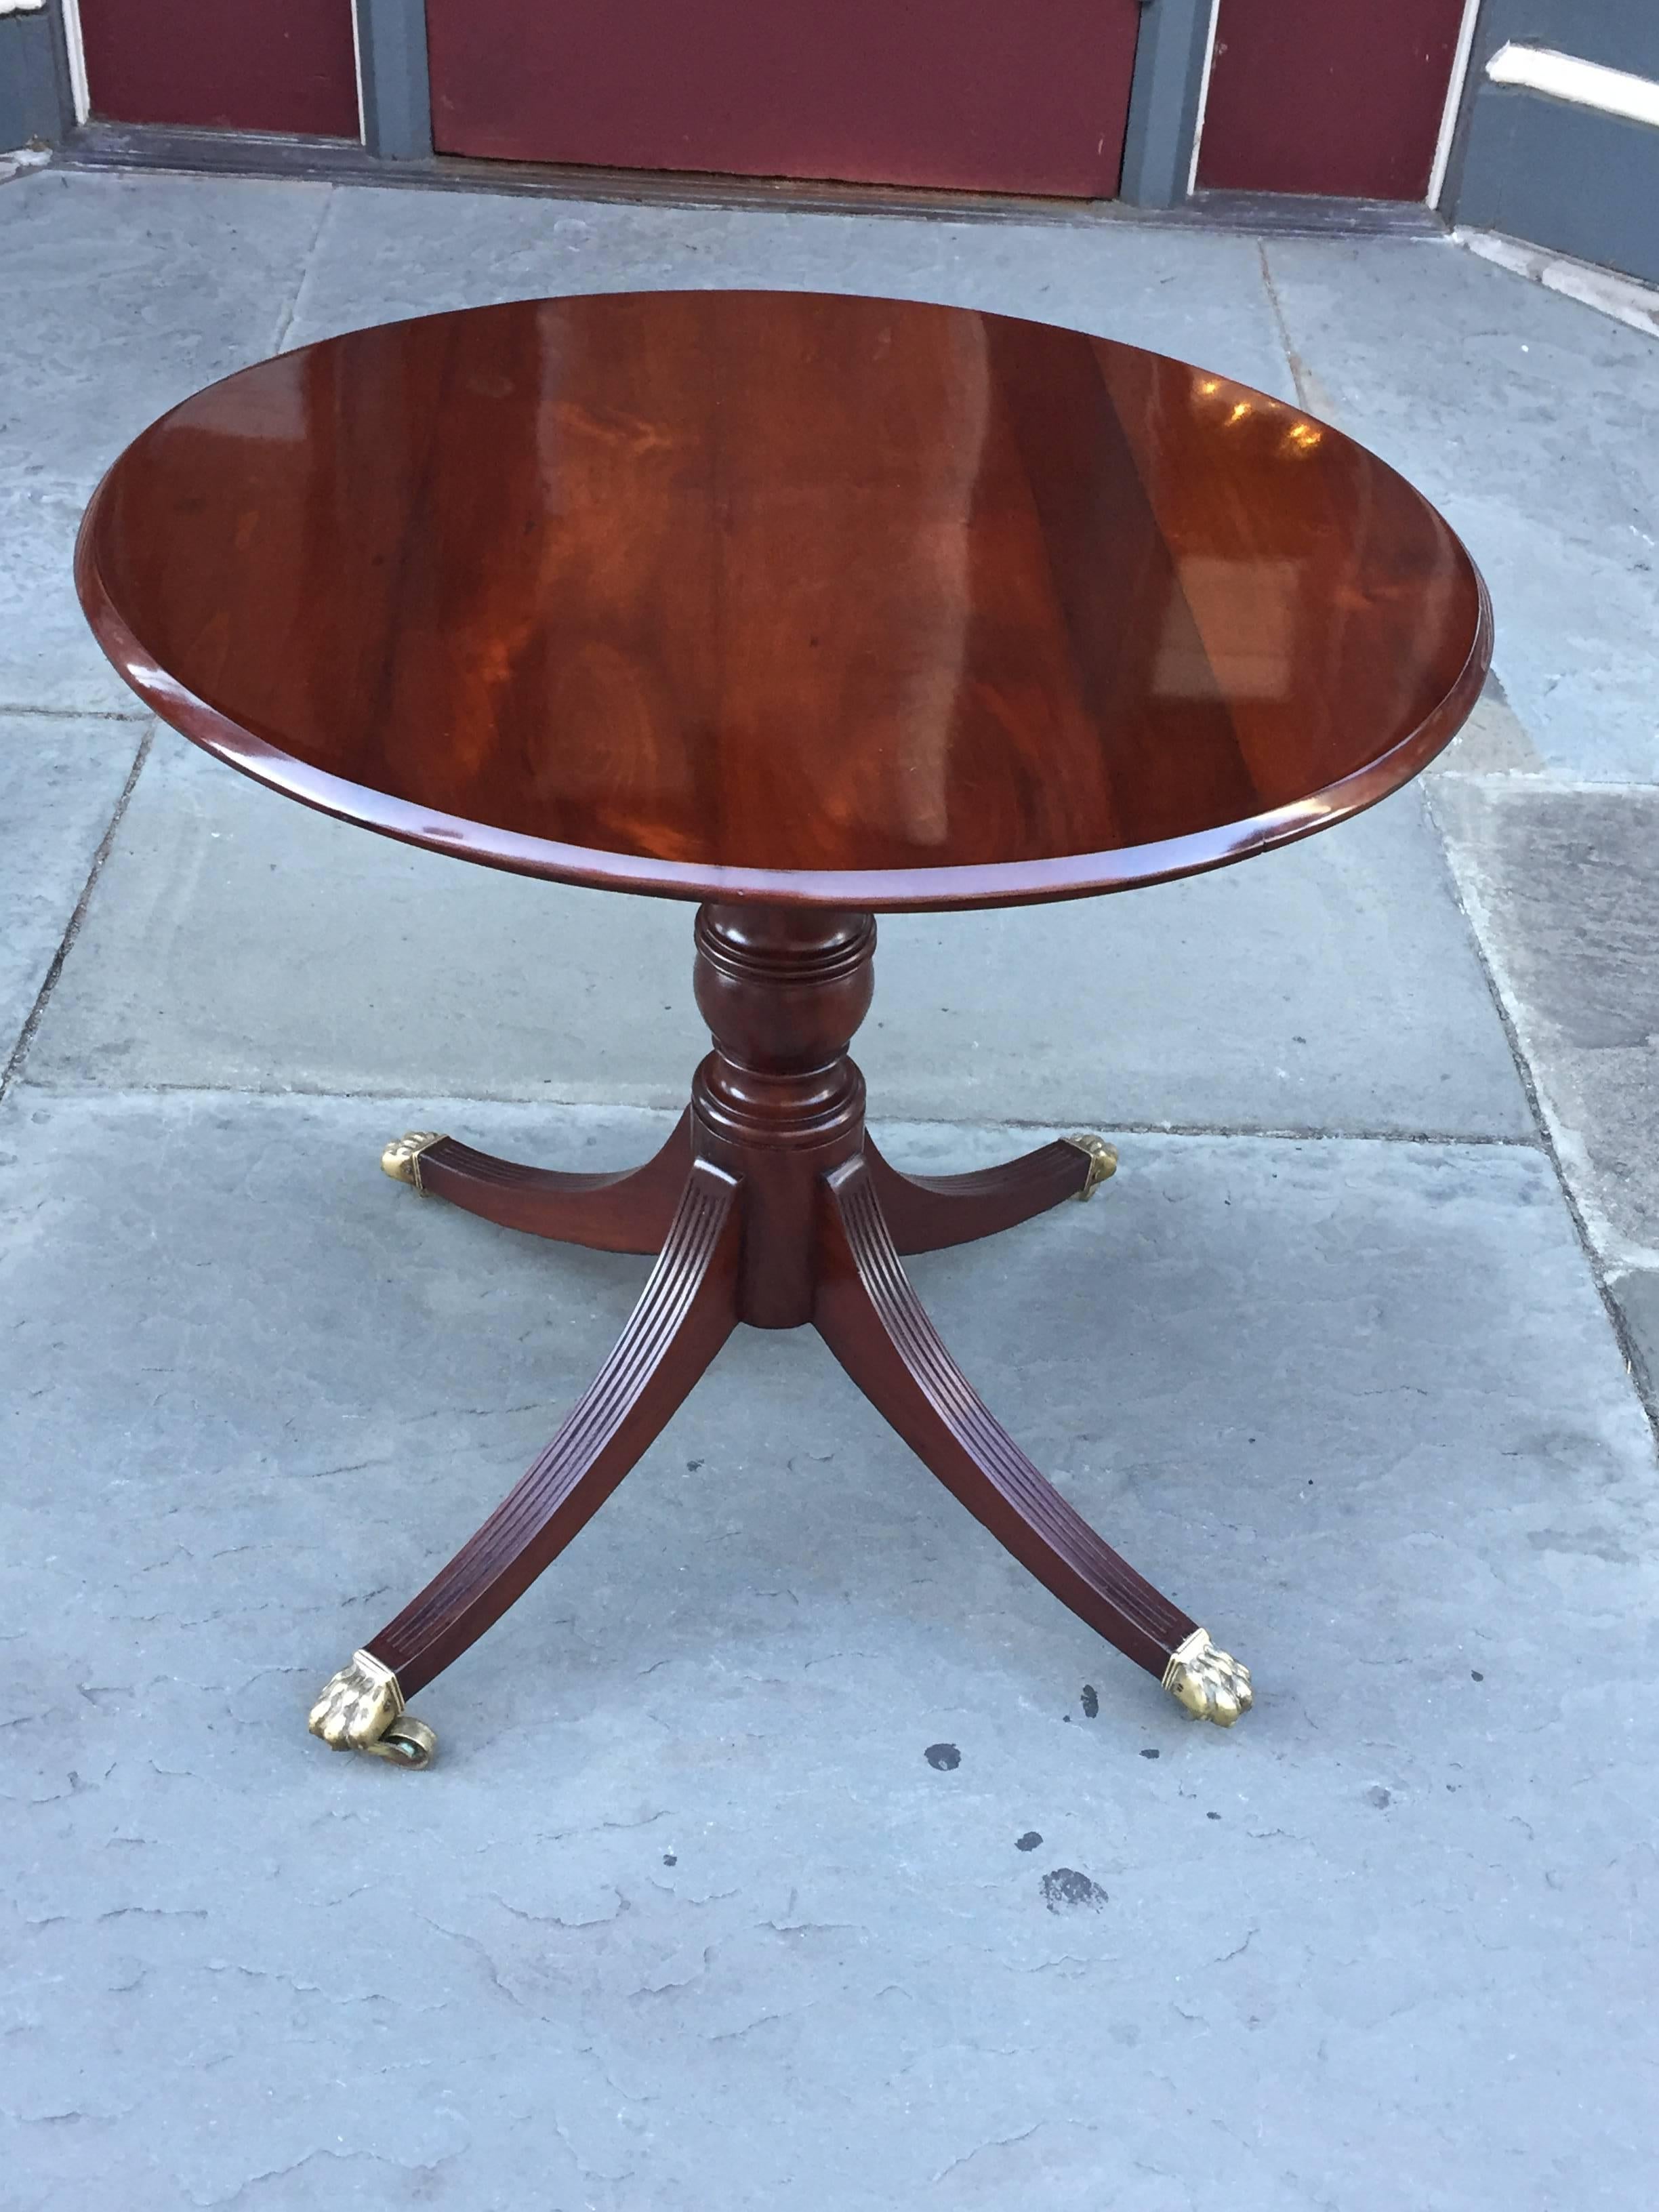 A tilt-top tea table from Barbados that sits on a urn-shaped pedestal with four, reeded sabre legs ending in brass claw toes, circa 1810.